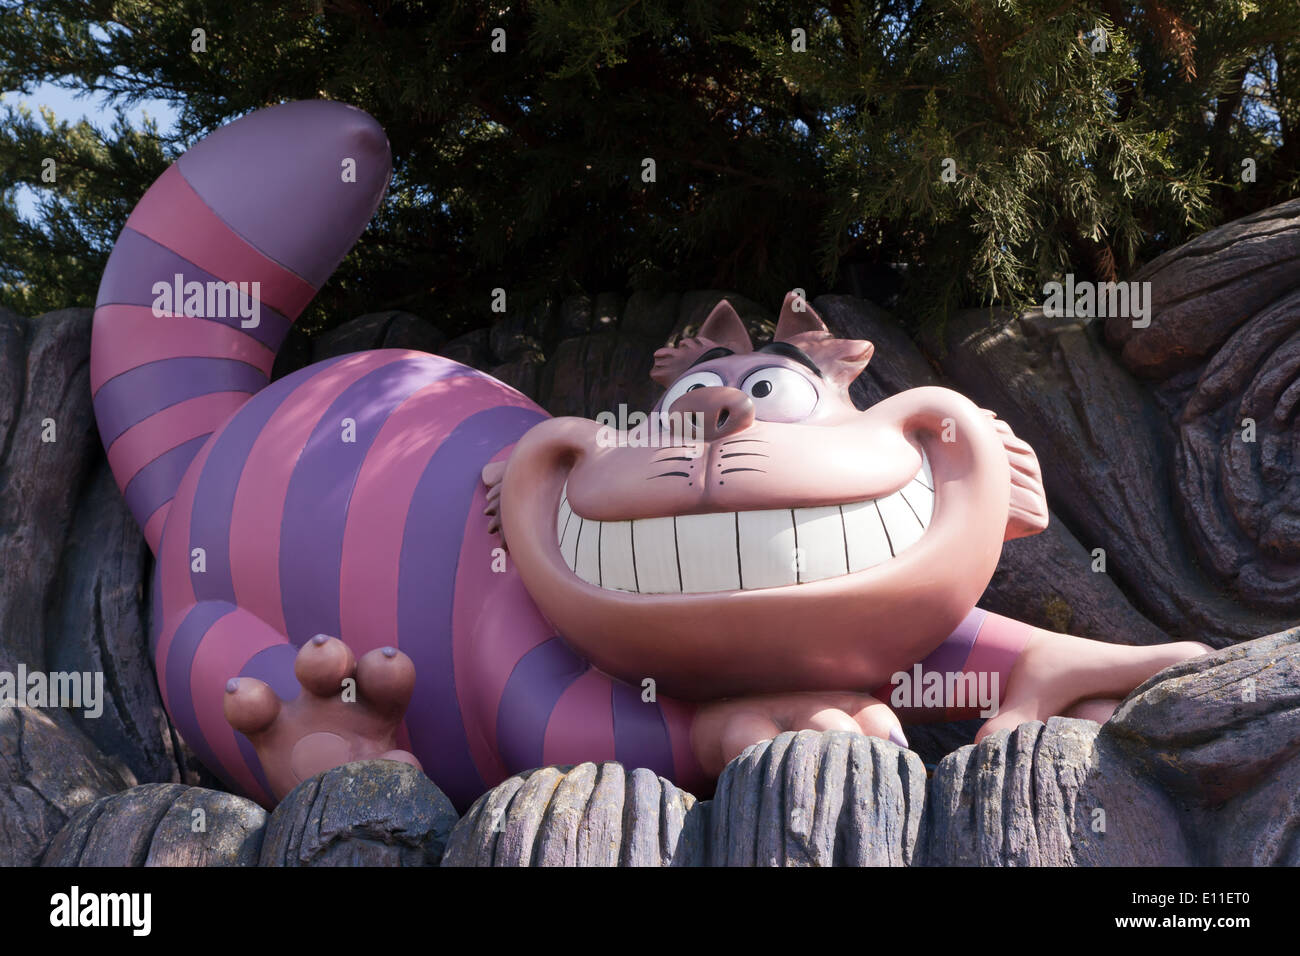 Model of the Cheshire Cat from Alice's Adventures in Wonderland, in Alice's Curious Labyrinth, Disneyland Paris. Stock Photo